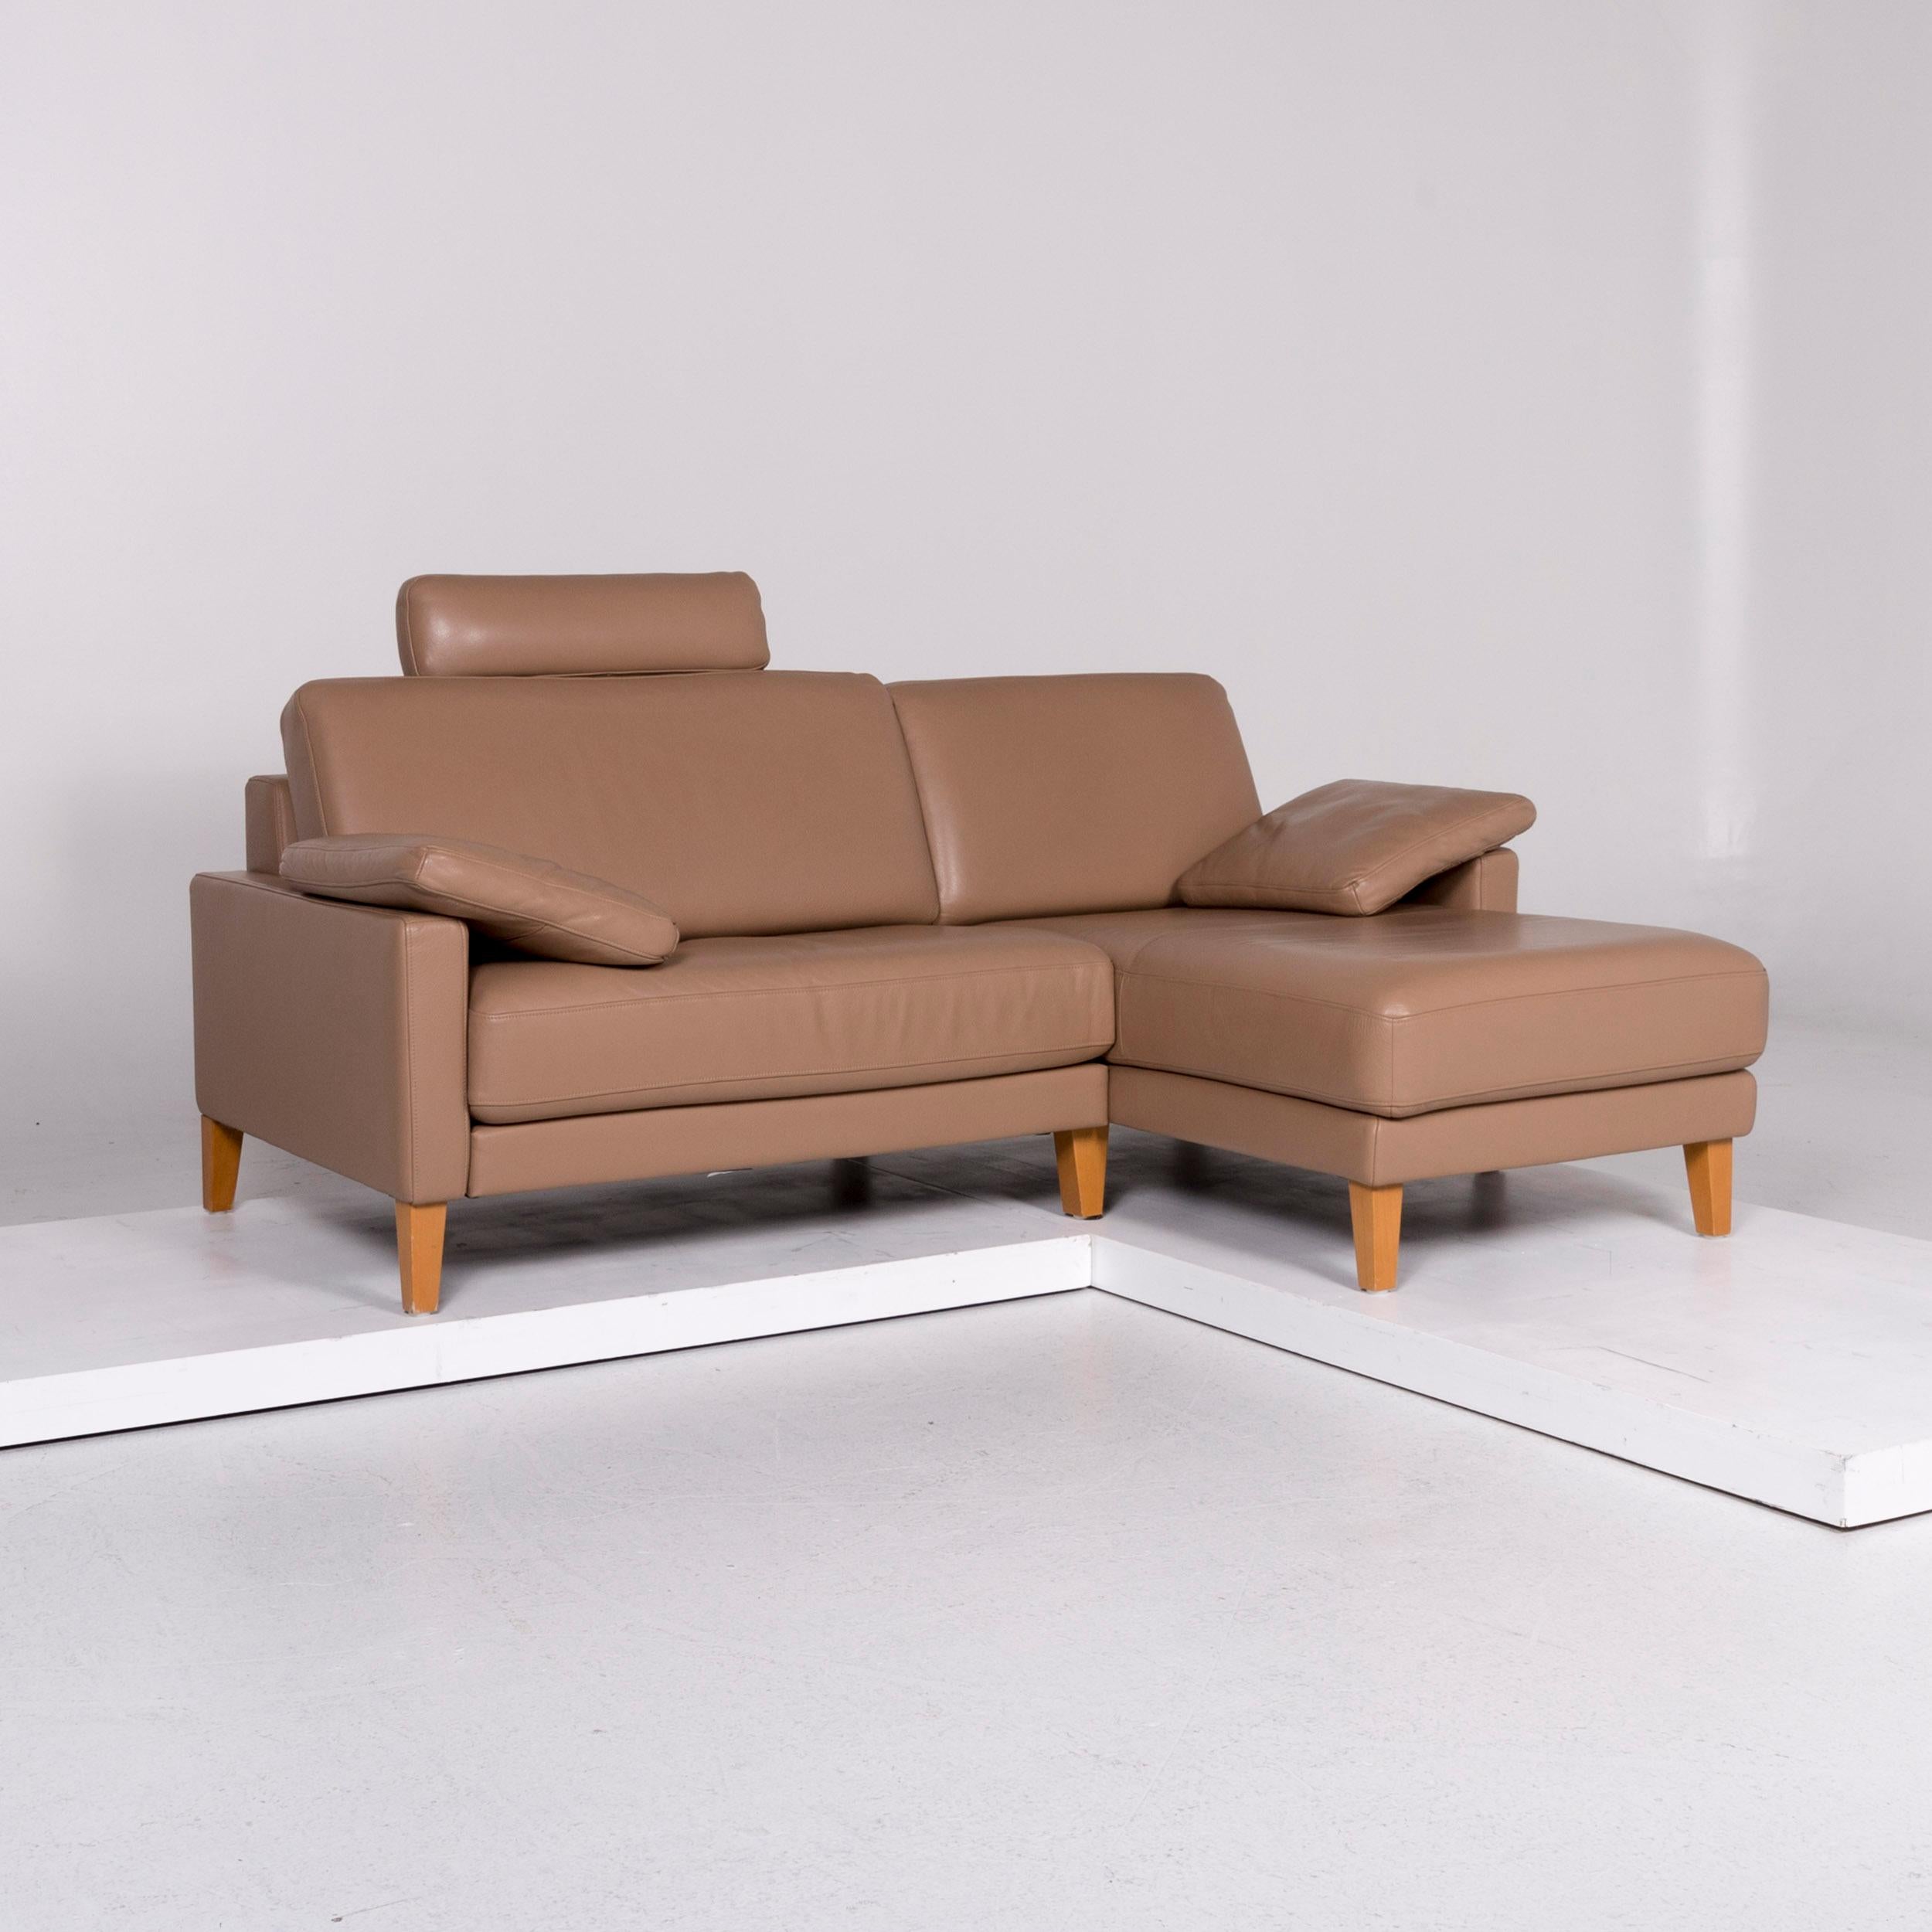 We bring to you a Rolf Benz leather corner sofa brown sofa couch.
  
 
 Product Measurements in centimeters:
 
 Depth 96
Width 198
Height 85
Seat-height 46
Rest-height 62
Seat-depth 59
Seat-width 177
Back-height 41.